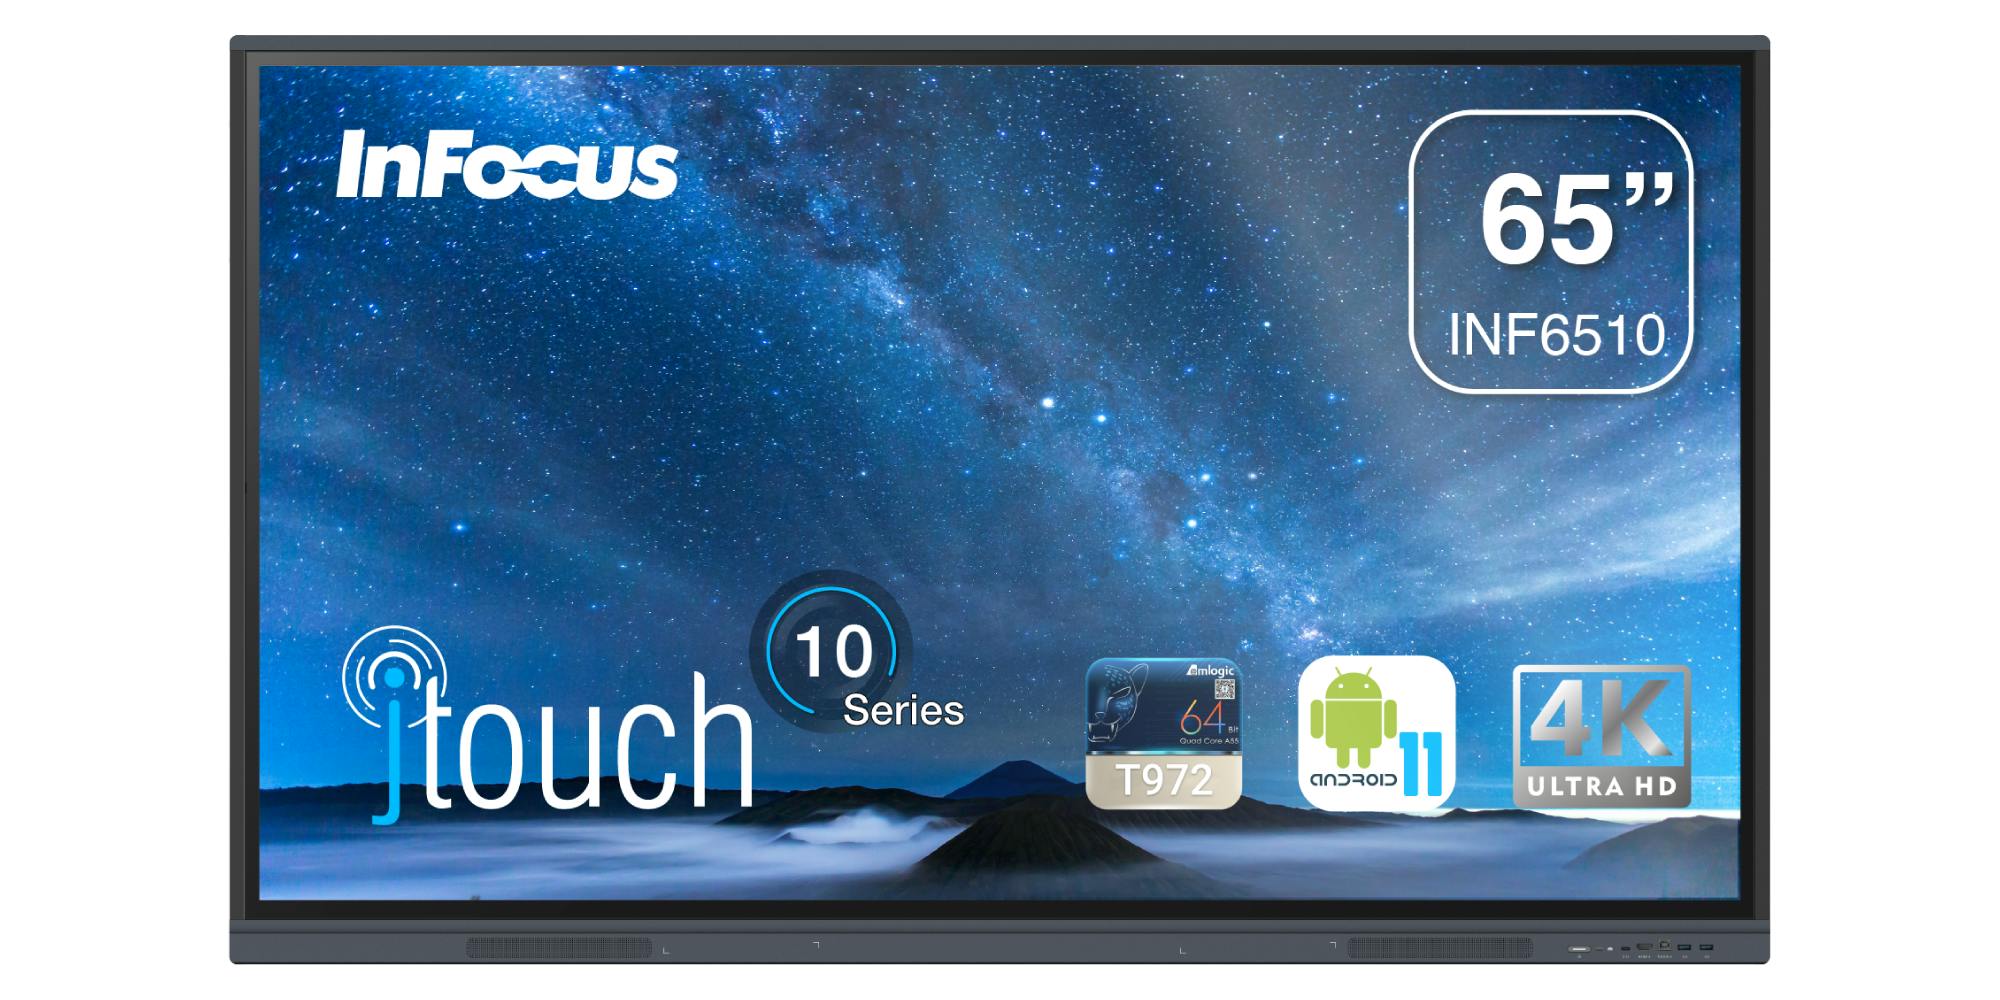 JTouch 10 Series - INF6510